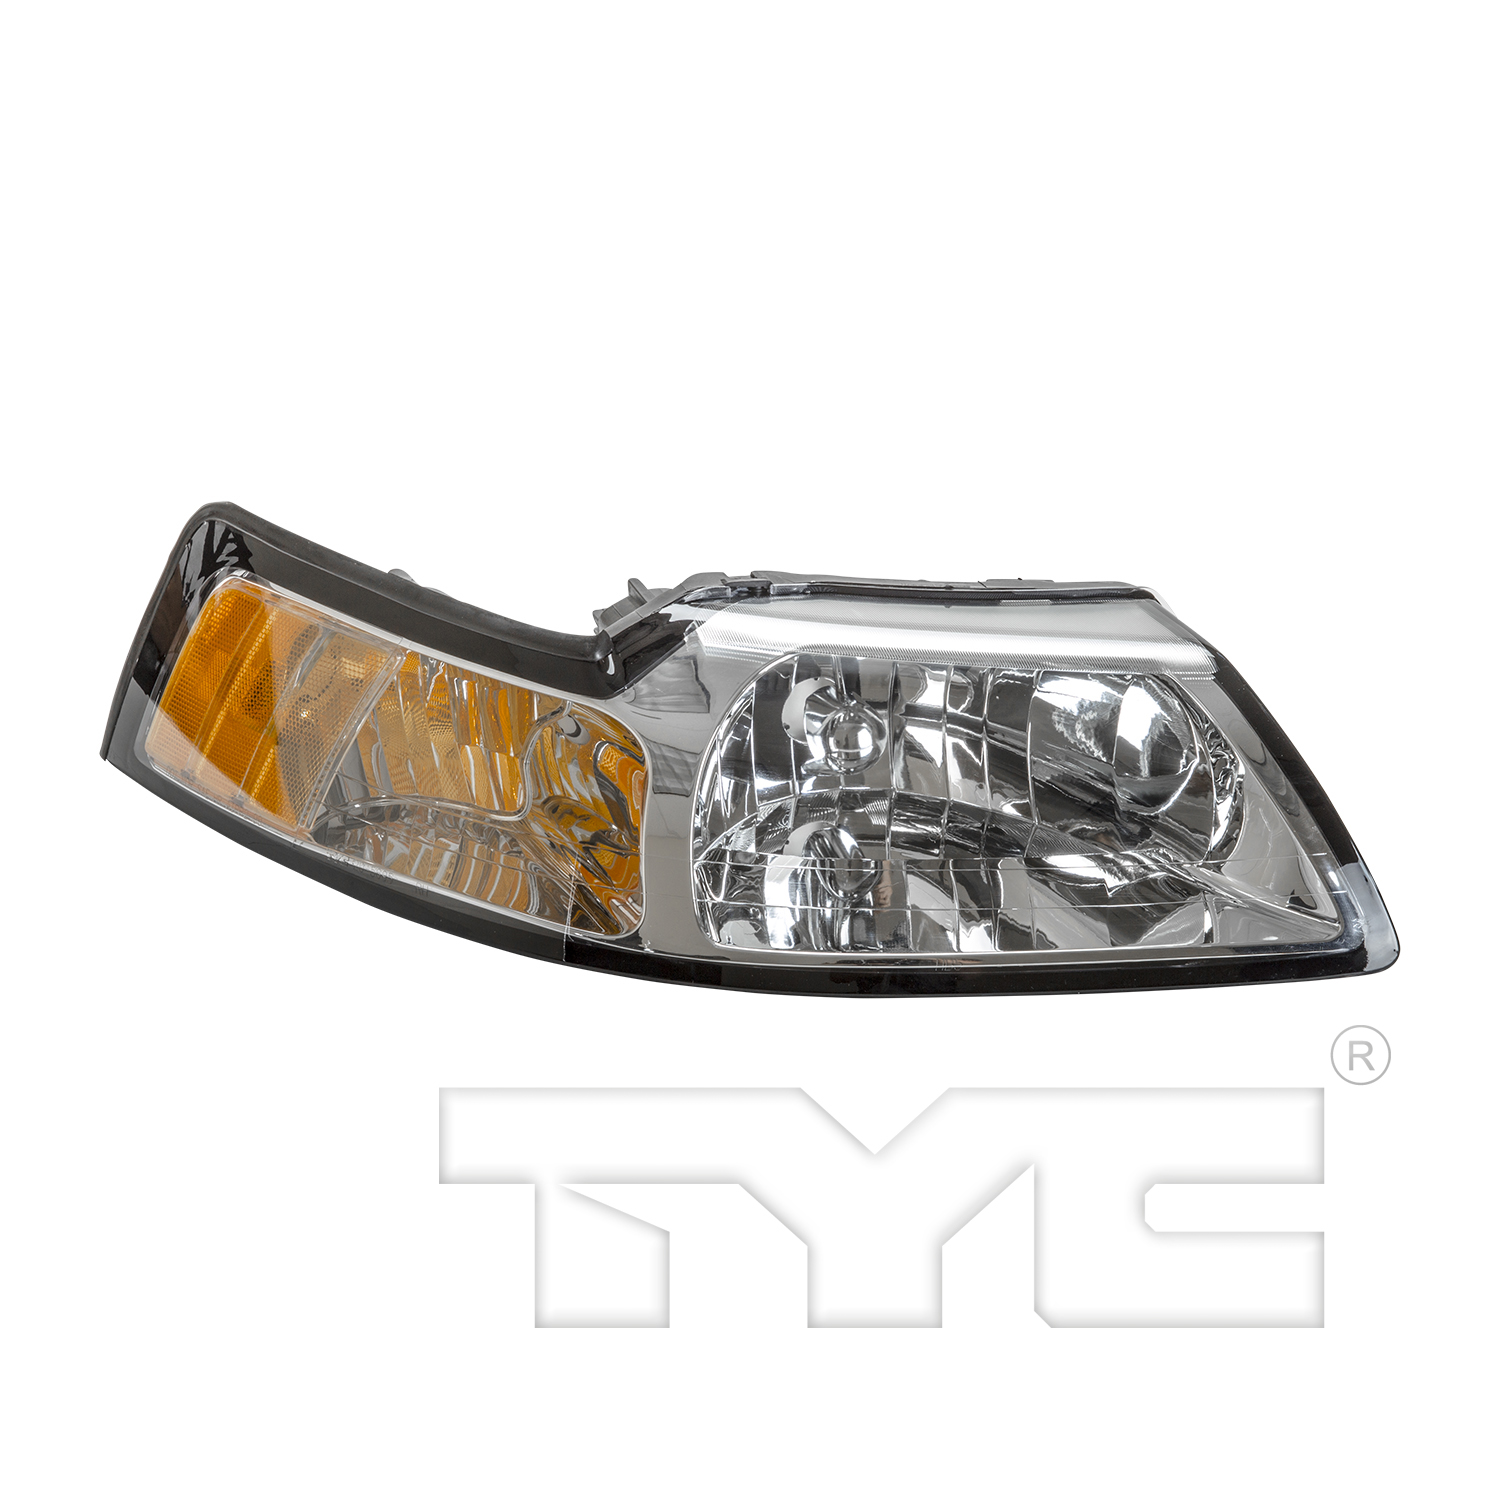 Aftermarket HEADLIGHTS for FORD - MUSTANG, MUSTANG,99-00,RT Headlamp assy composite